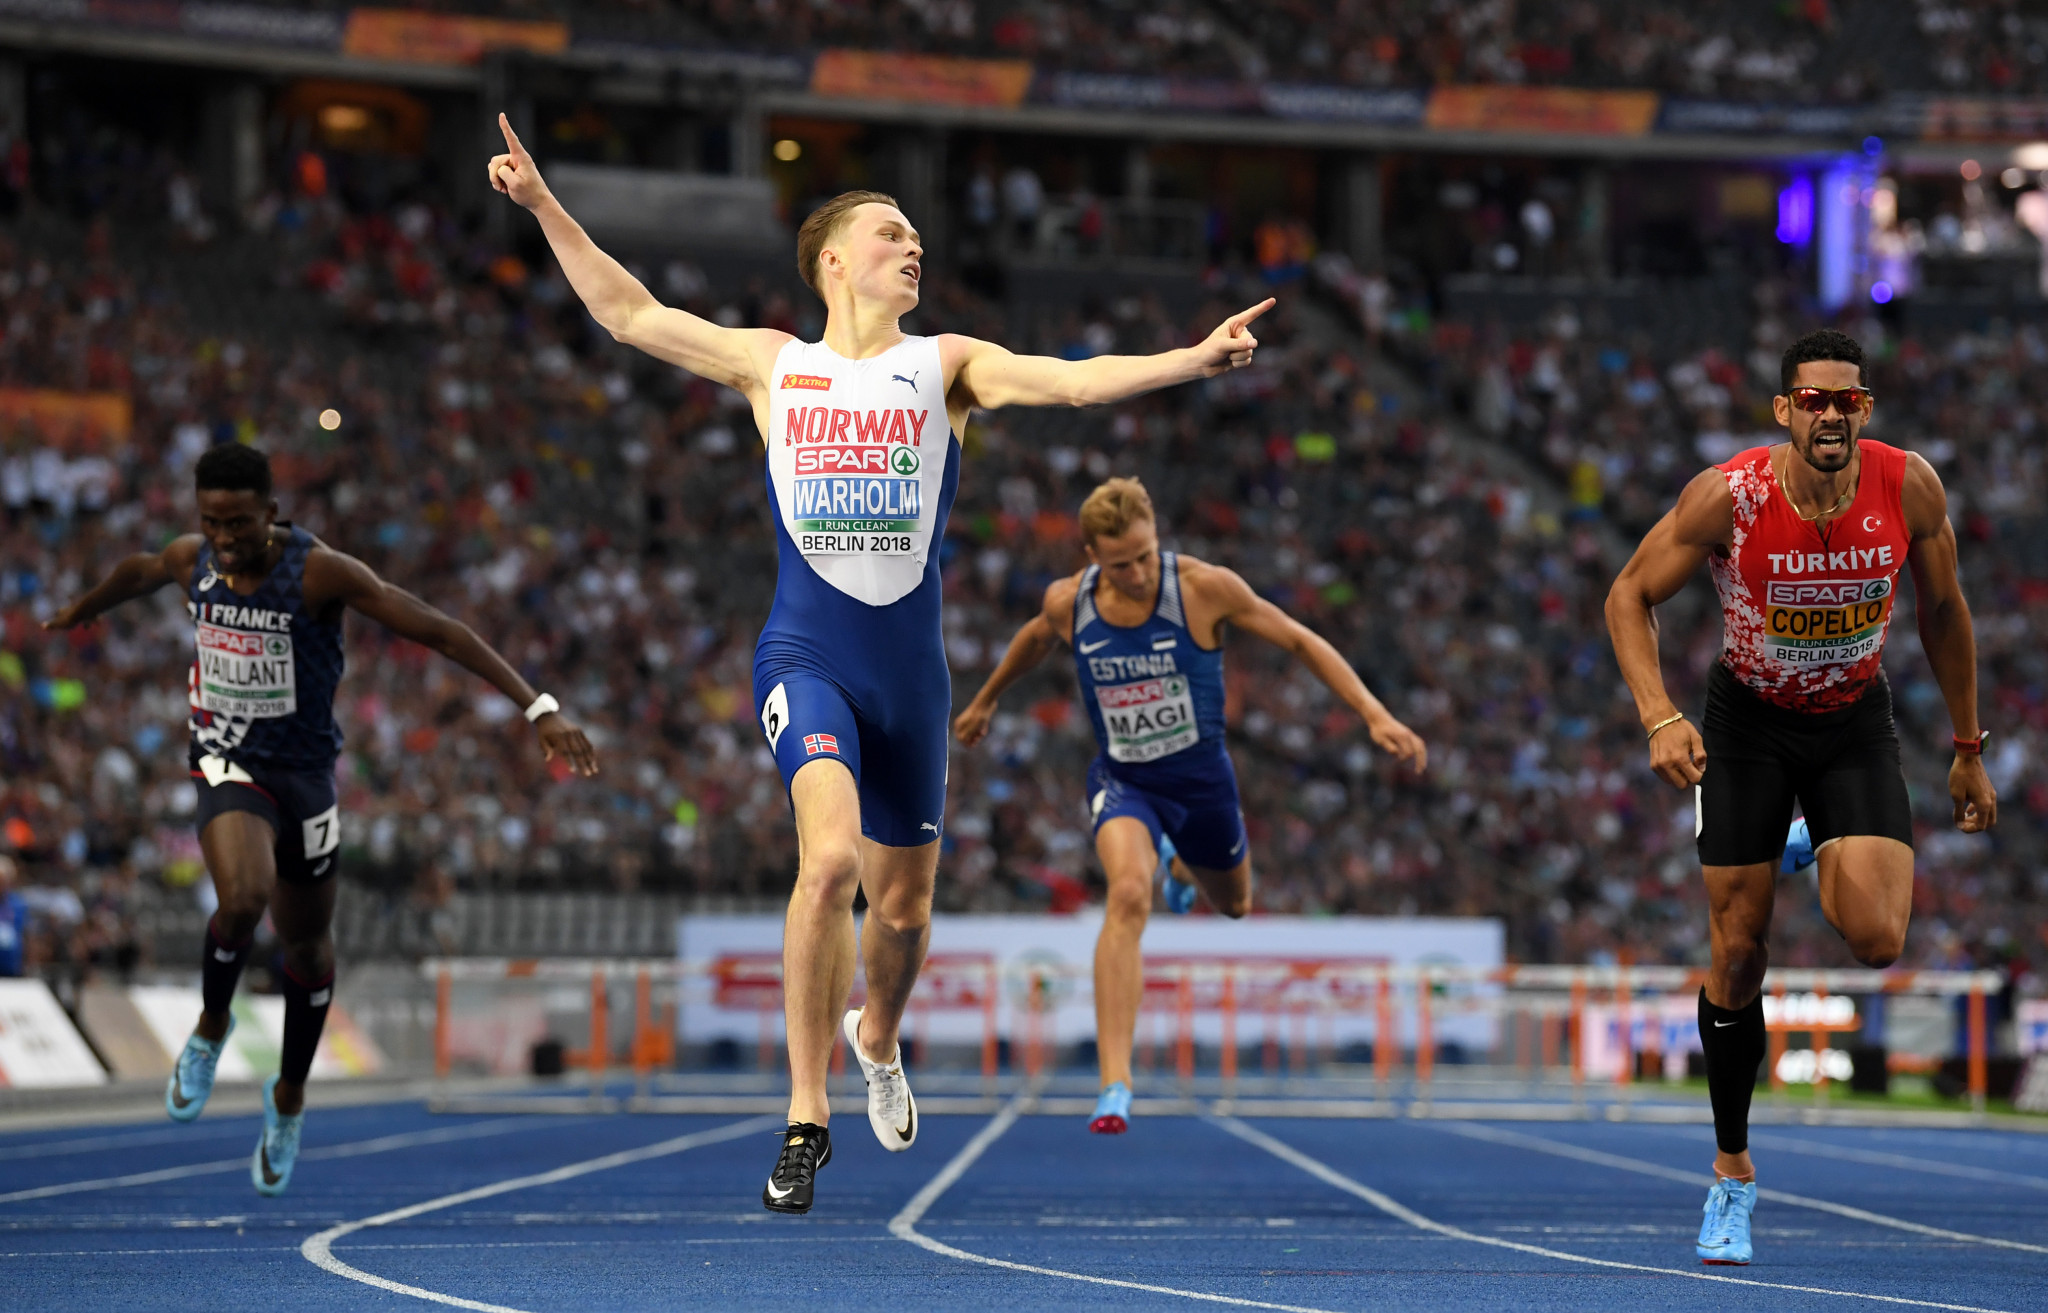 Over in Berlin at the European Athletics Championships, world champion Karsten Warholm of Norway took the gold medal in the men's 400m hurdles ©Getty Images